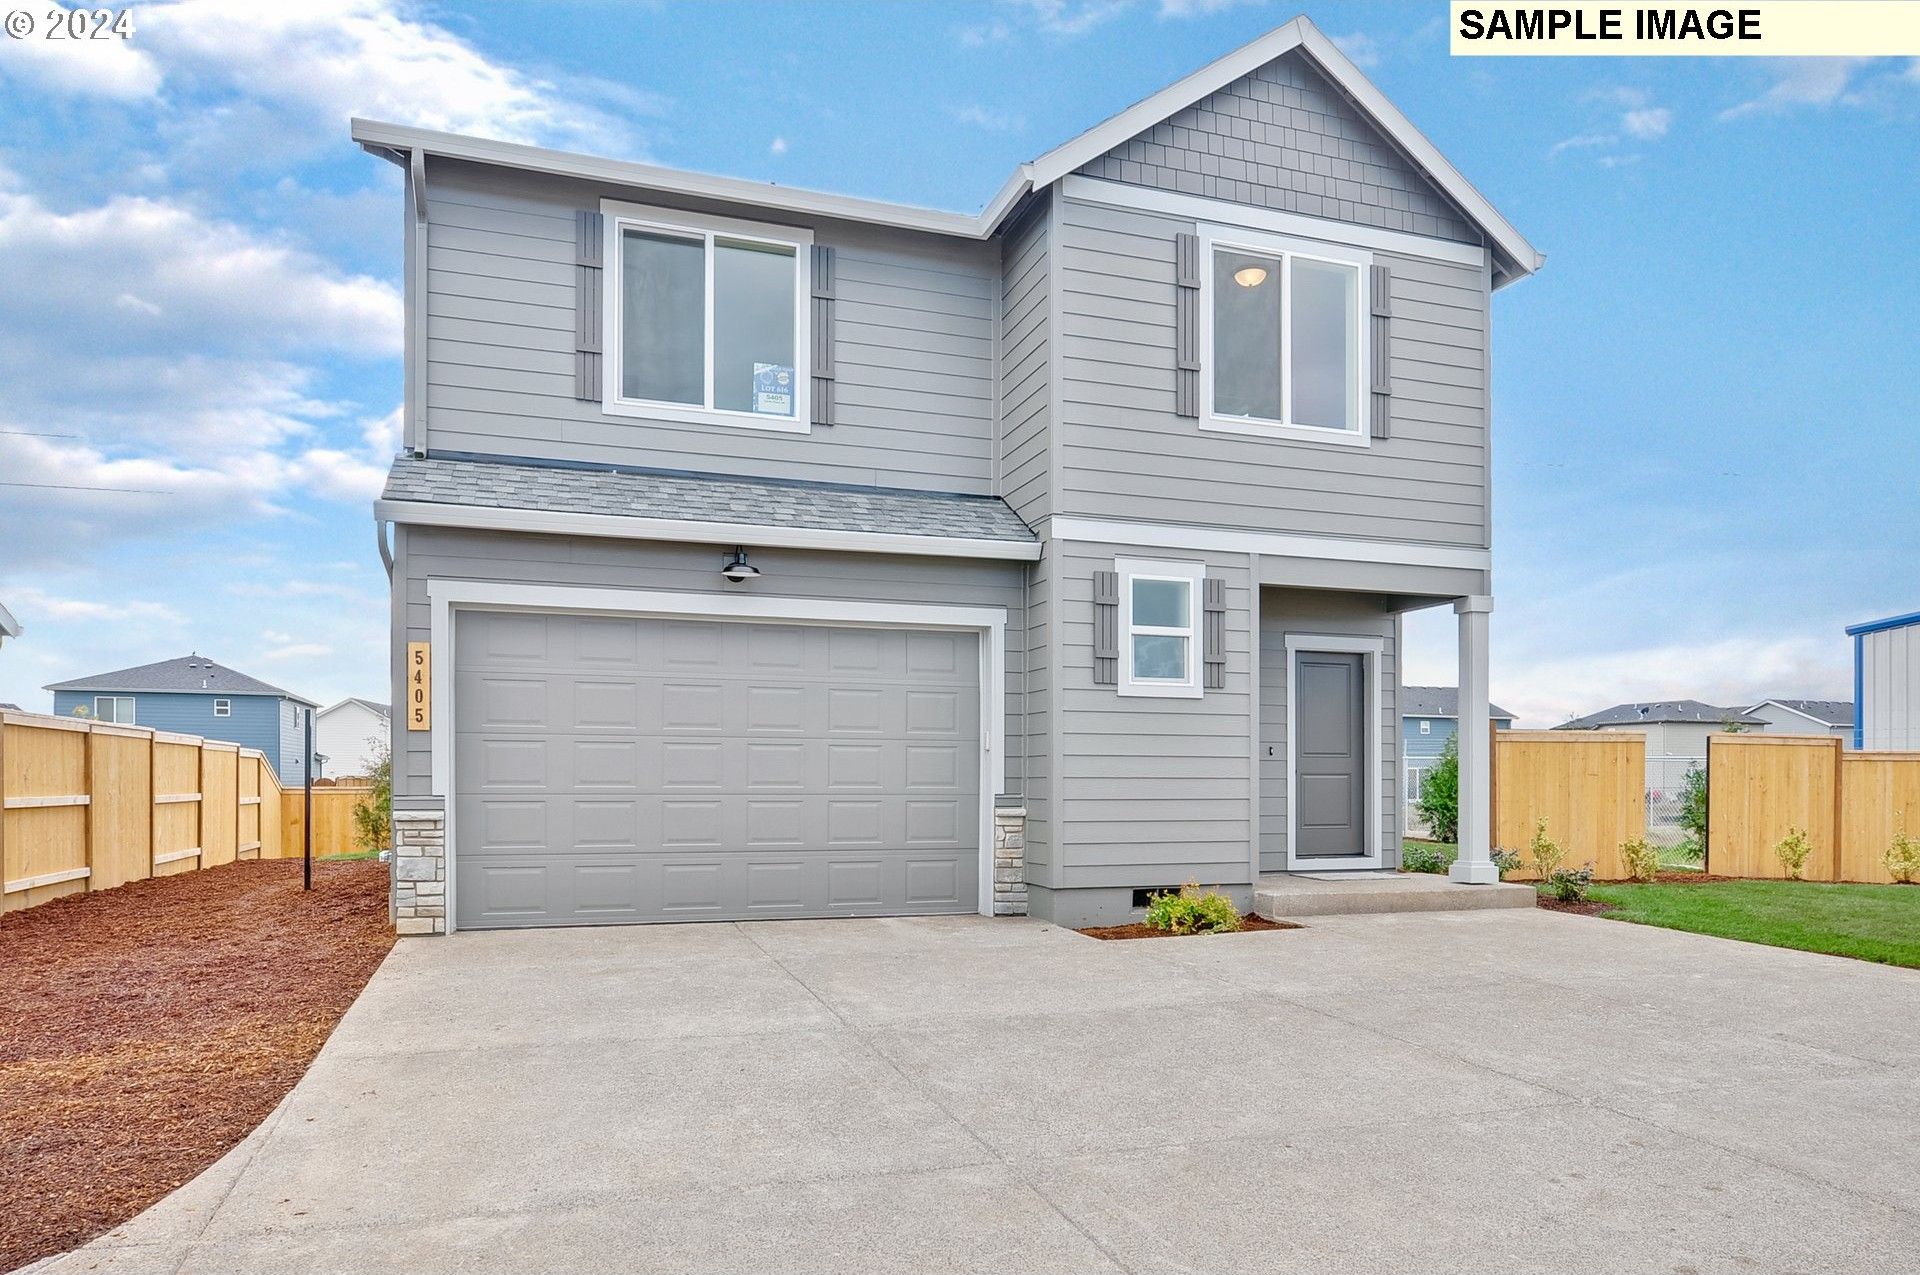 11232 Blueberry Loop. Donald, OR 97020